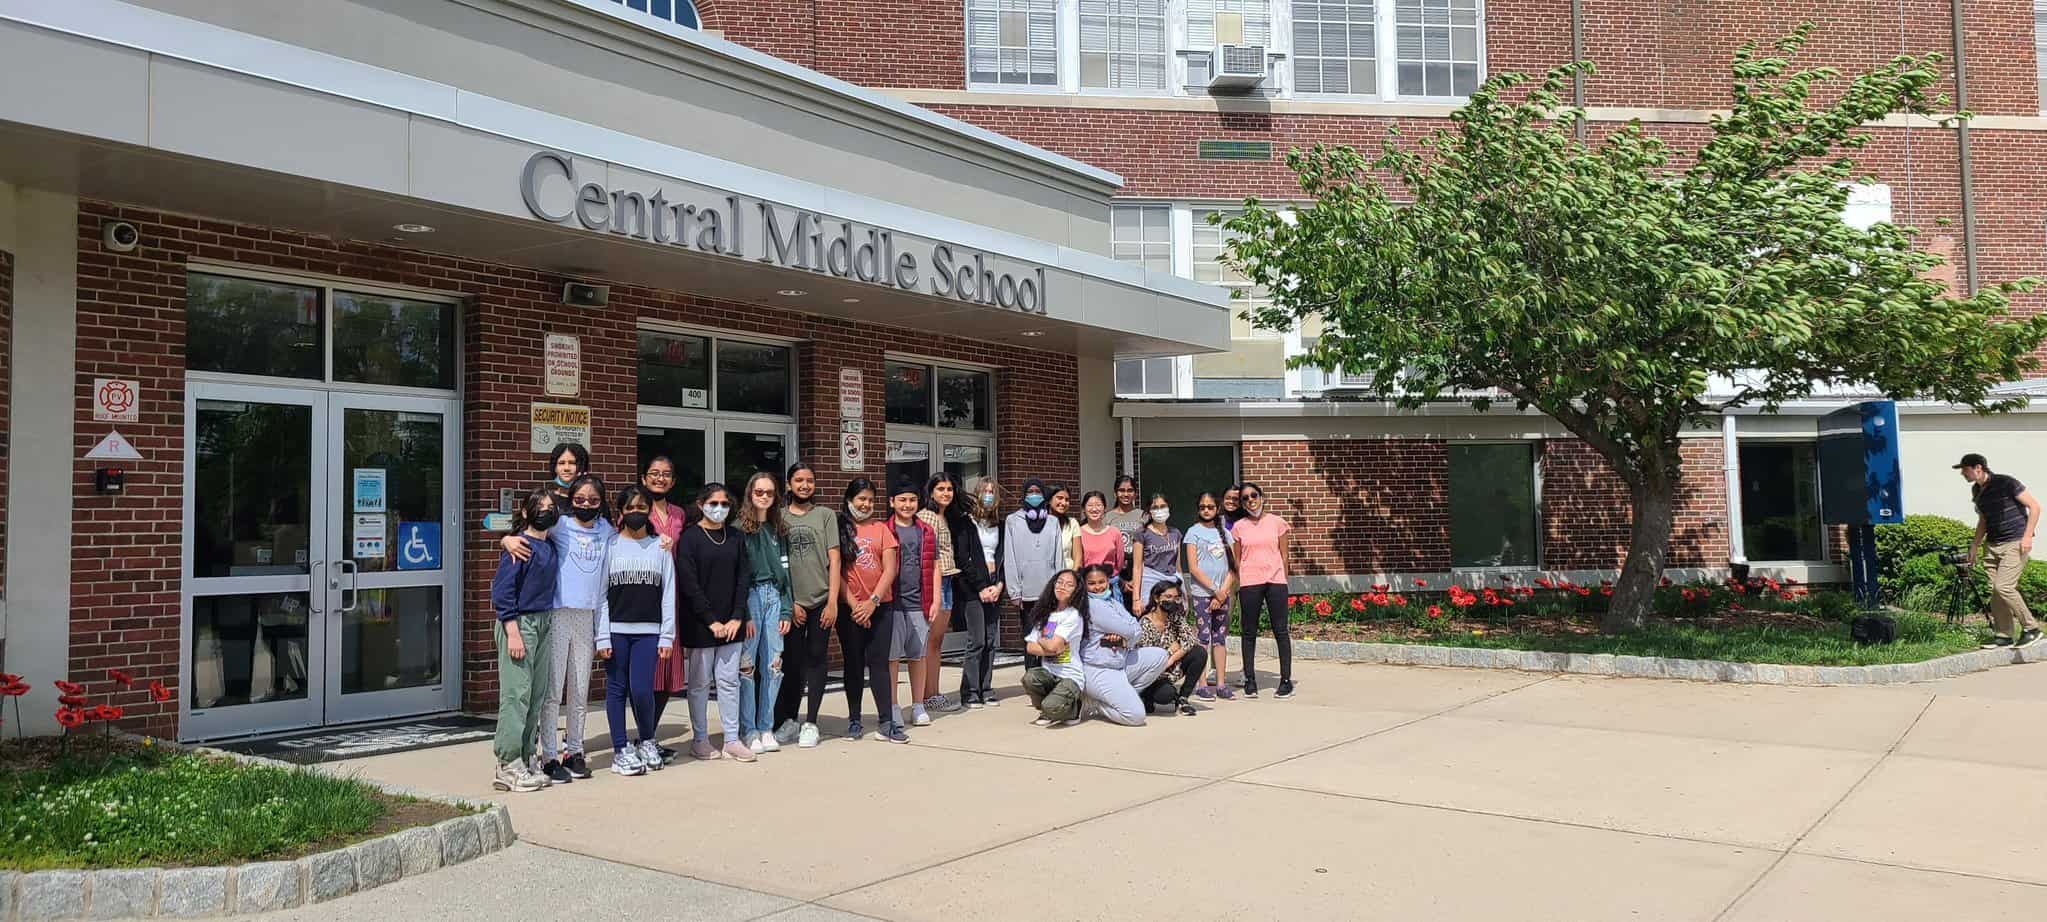 Central Middle School Parsippany-Troy Hills NJ